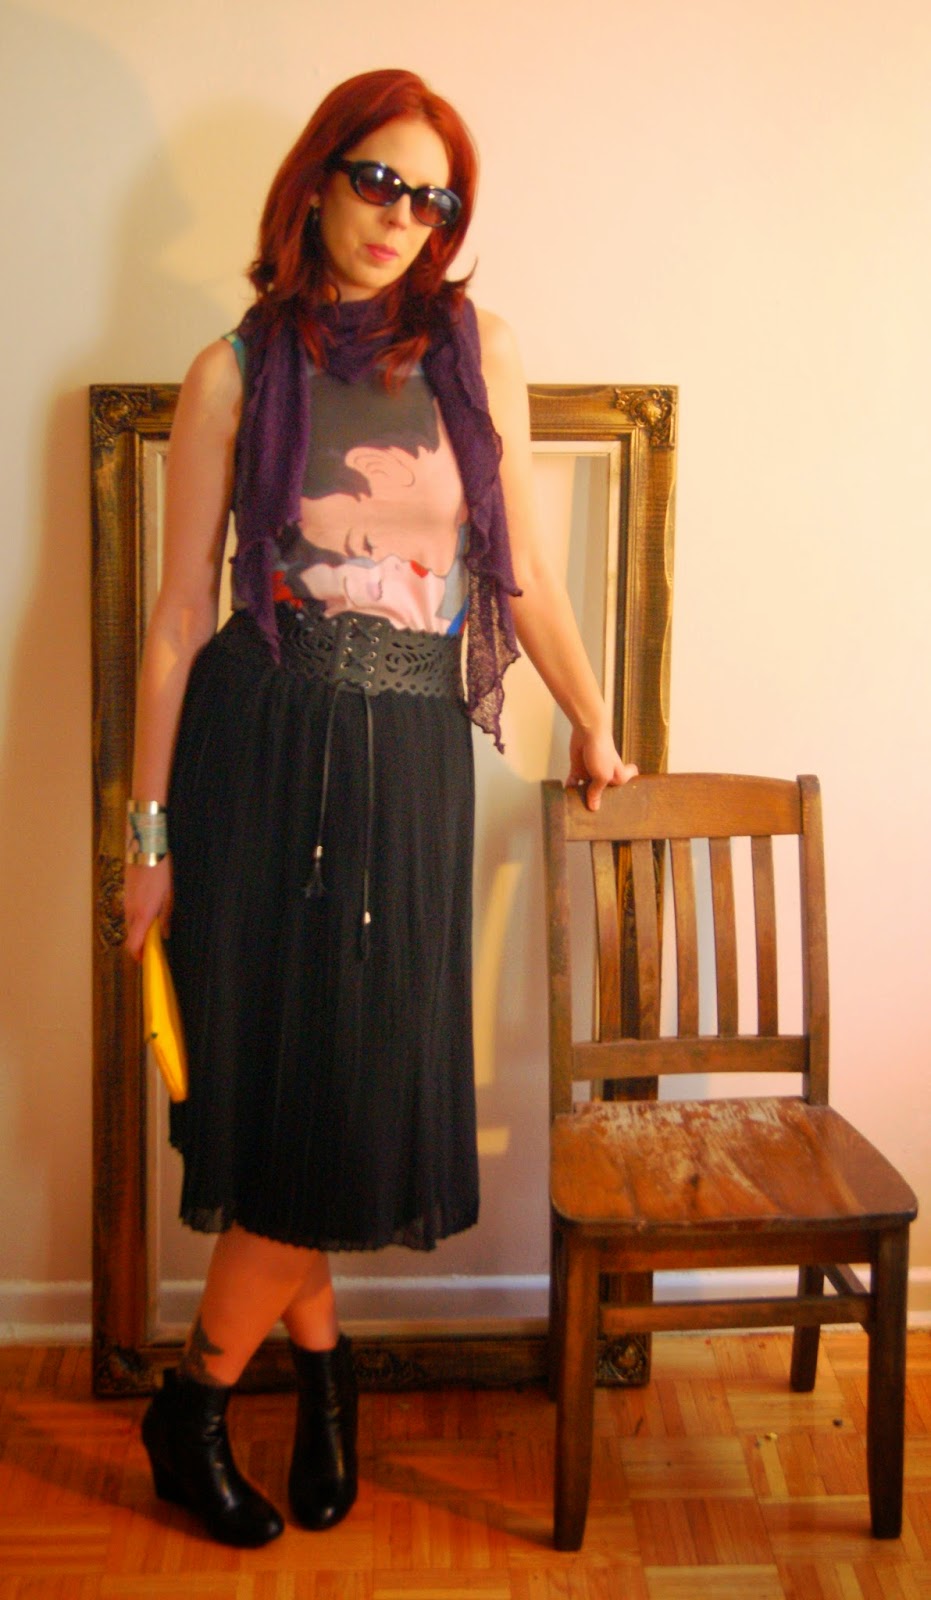 Endless Style Options!: Black Pleated Skirt from H&M, Belt and Top from Hot Topic Fashion Style, Melanie.Ps, Blogger, The Purple Scarf Toronto